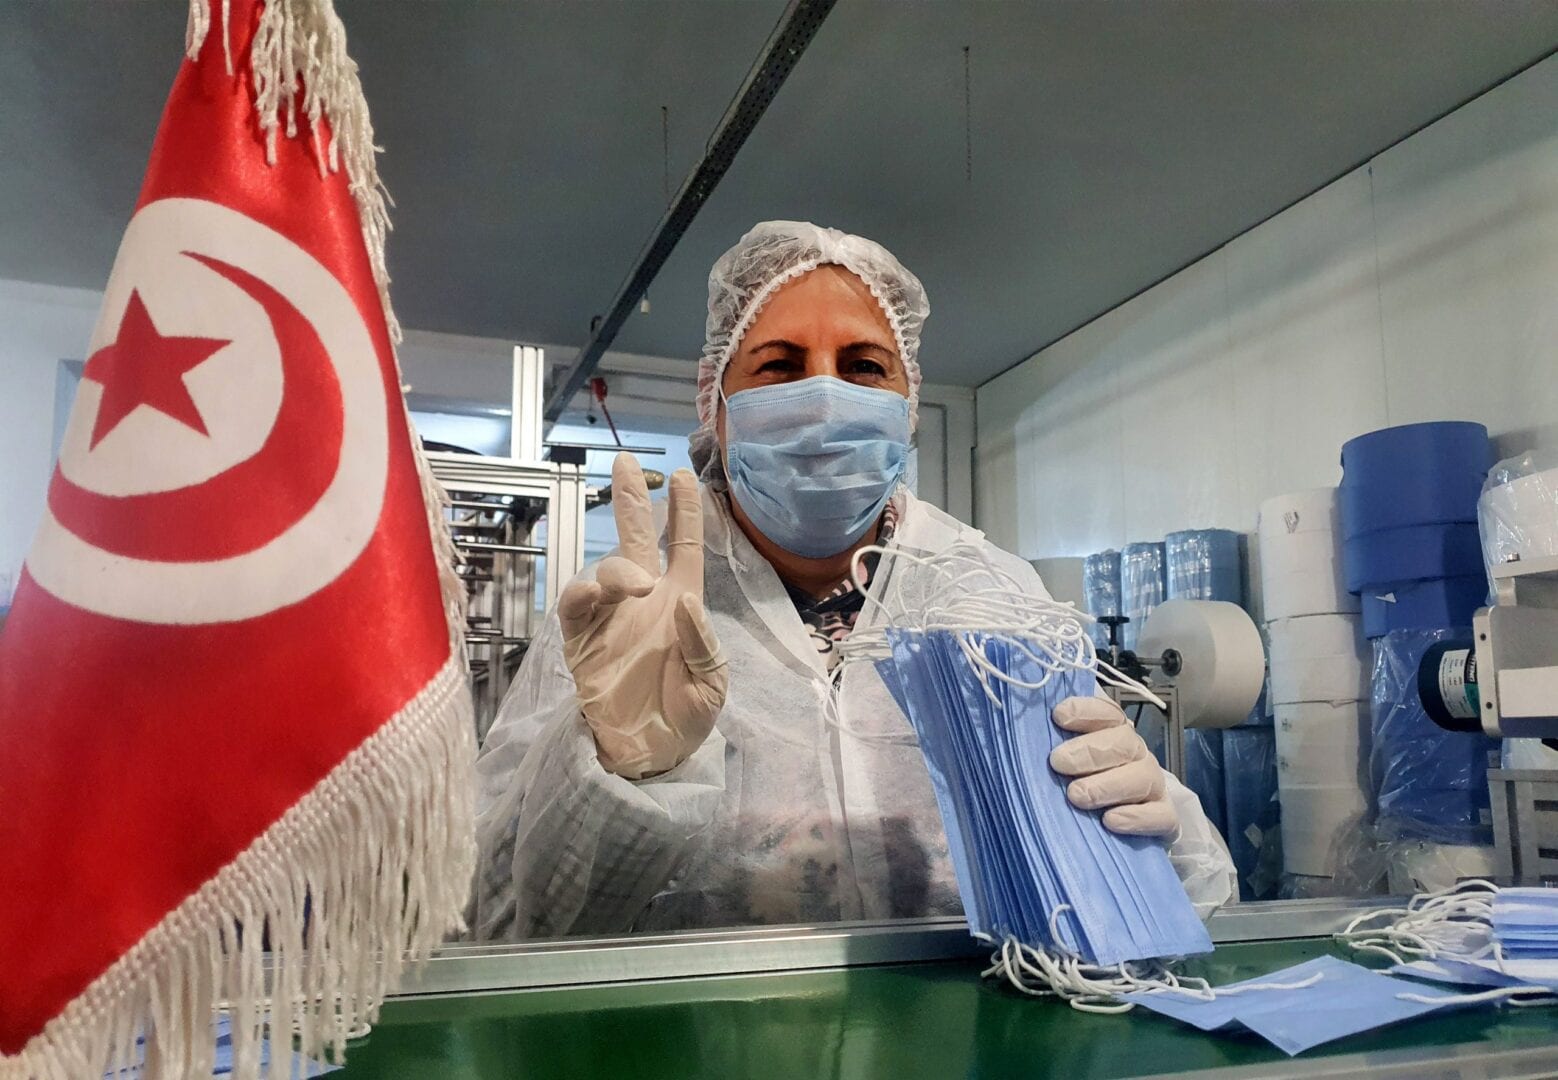 A handout picture provided by the Consomed company for medical products on March 26, 2020, shows a Tunisian woman flashing the victory sign as she works on the production of medical masks in the company's factory in the central city of Kairouan.